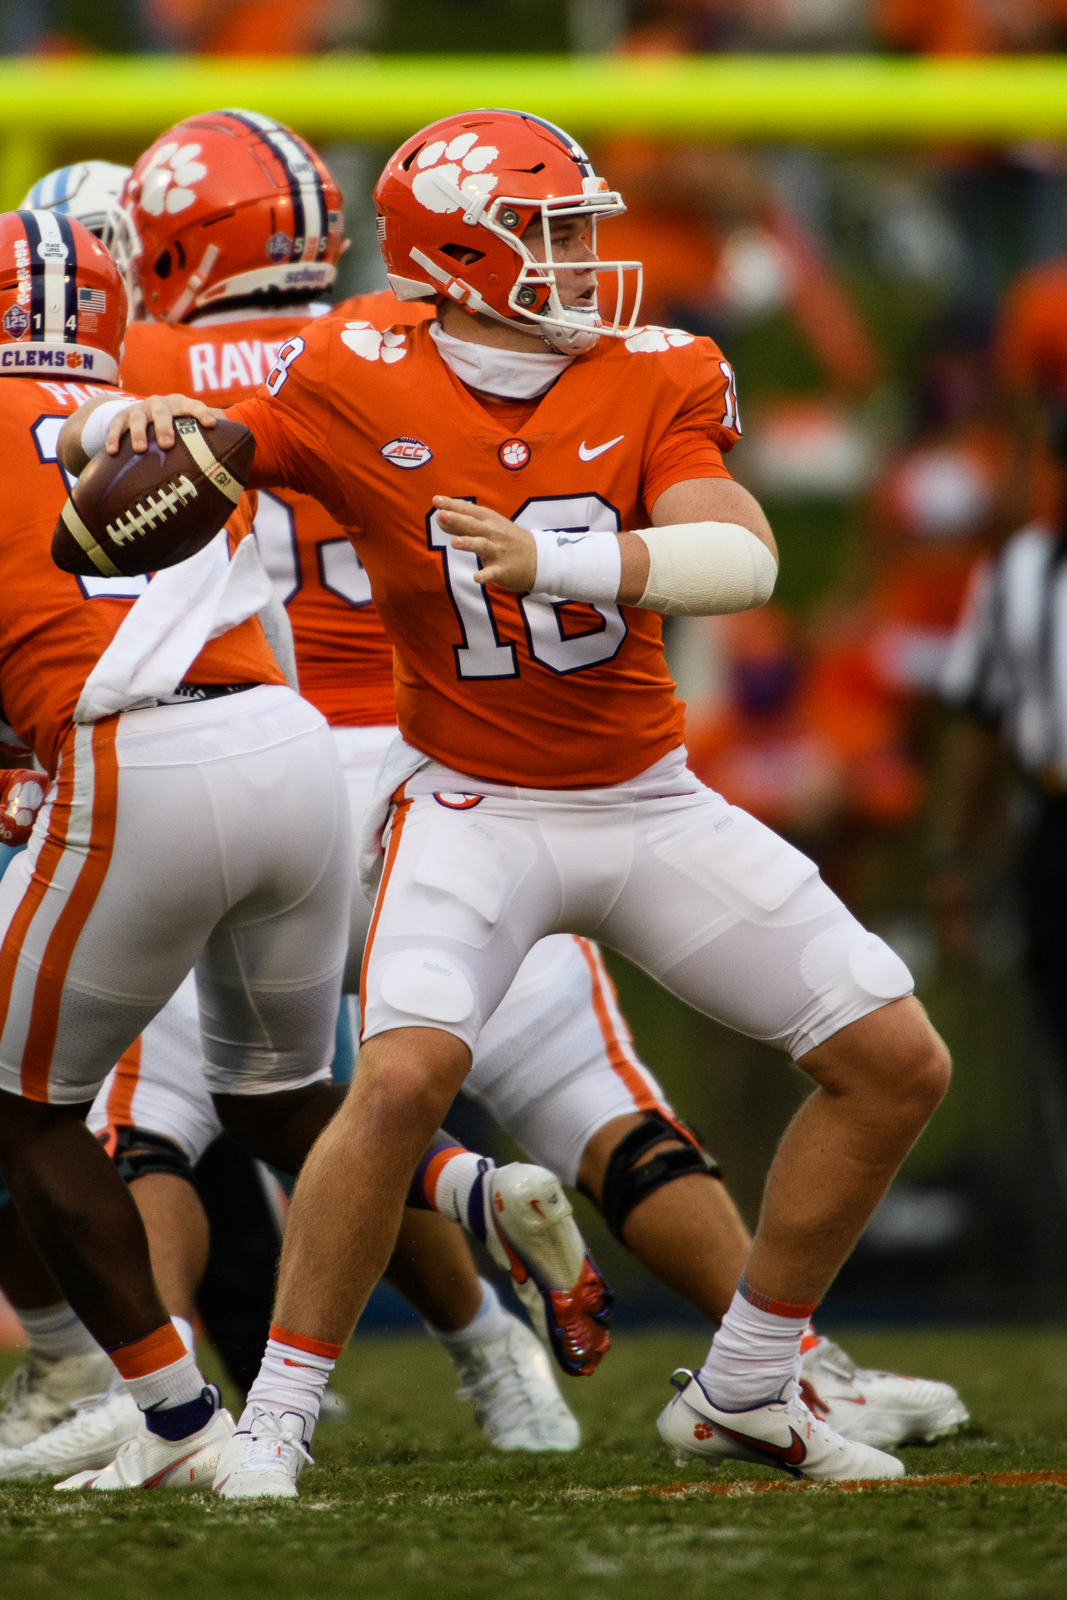 Clemson Football Photo of Hunter Helms and thecitadel